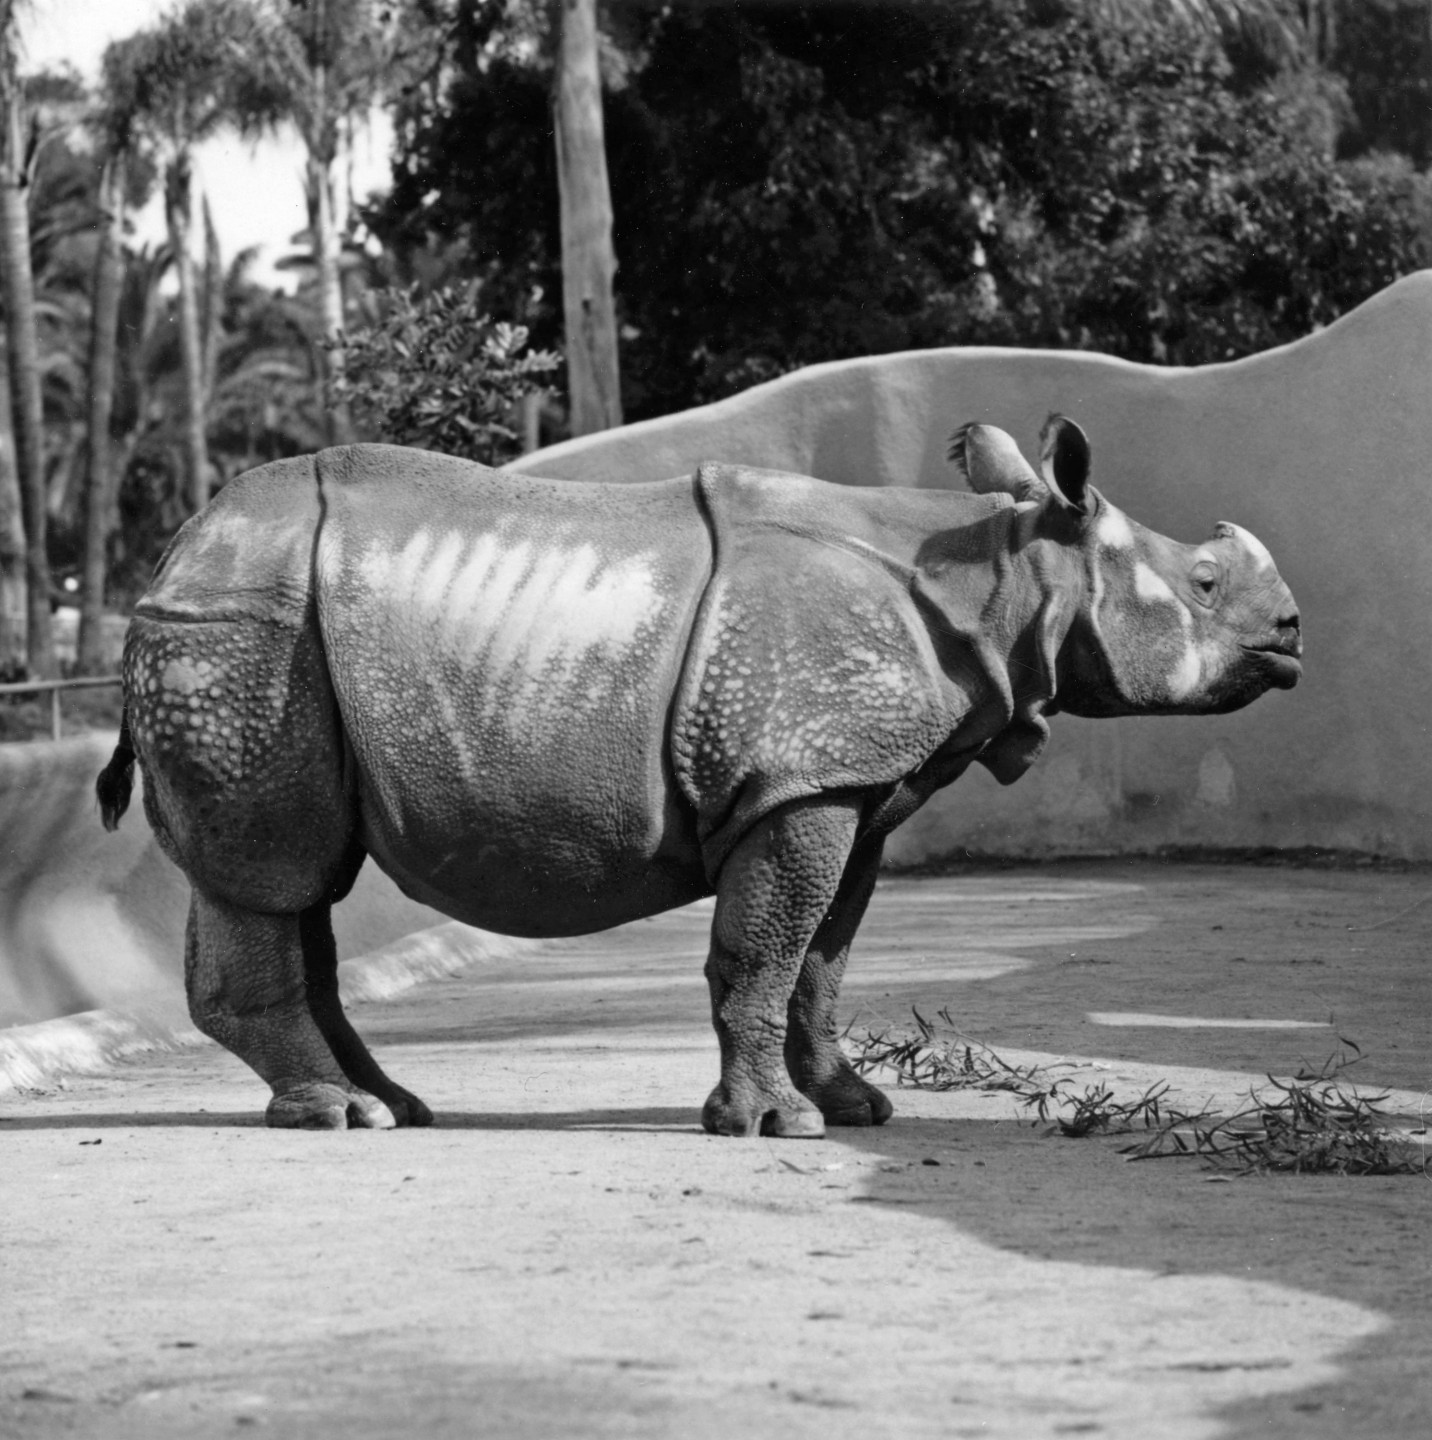 One-year-old Lasai came to the San Diego Zoo from the Basel Zoo in Switzerland in 1963. With his arrival, the Zoo’s collection could boast black, white, and greater one-horned rhinoceros species. Each was housed in newly constructed, moated exhibit areas on the large mammal mesa. A volume of correspondence reflected efforts to obtain a mate for him before Jaypuri, a young female born in India’s Kaziranga National Park, joined Lasai in 1965. Transferred to the fledgling Wild Animal Park in 1972, breeding hopes ran high for the pair.